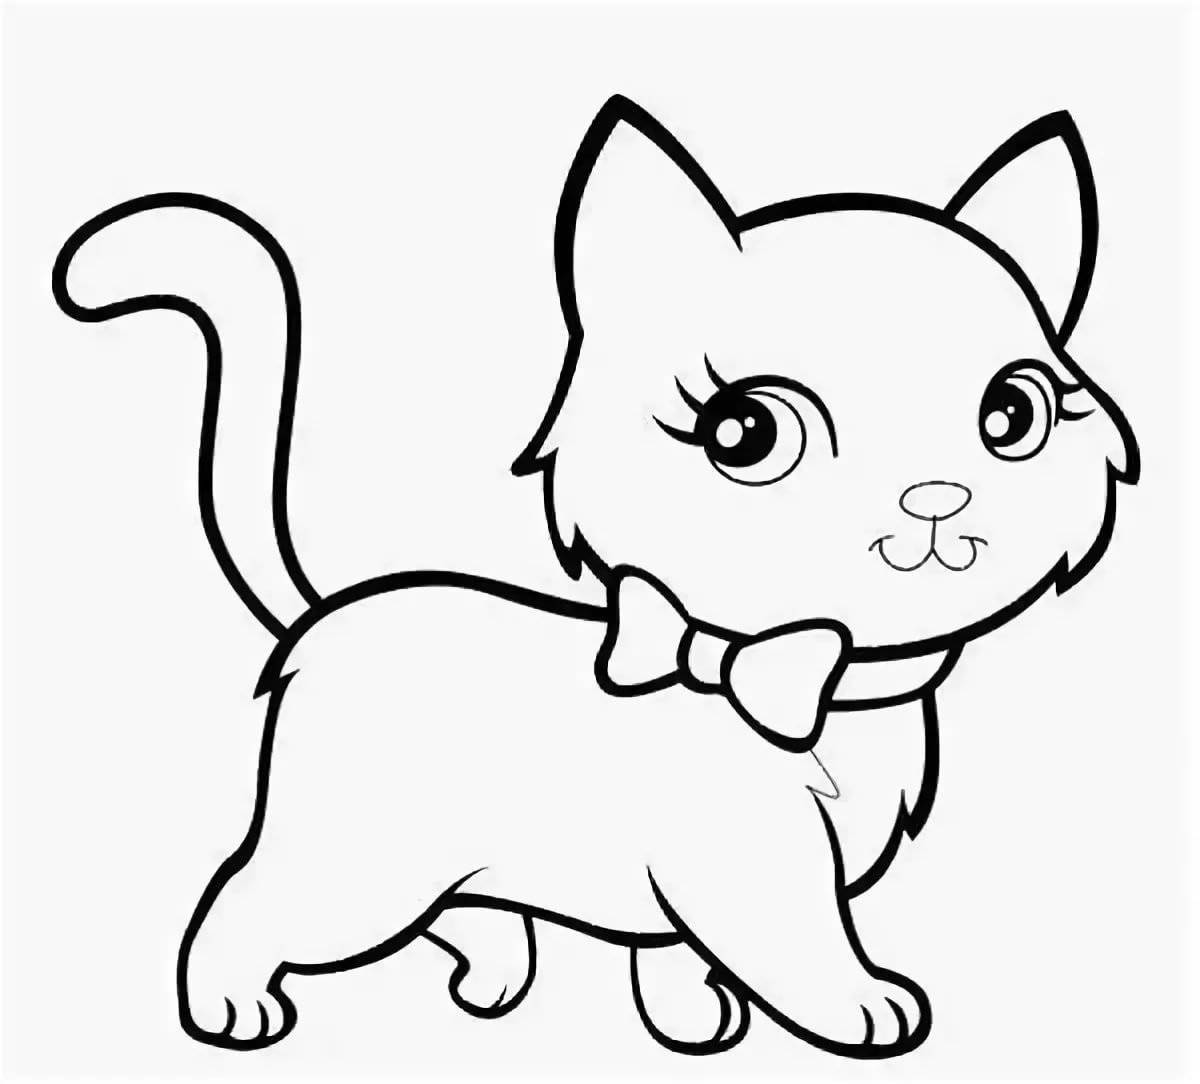 Coloring soft kitty